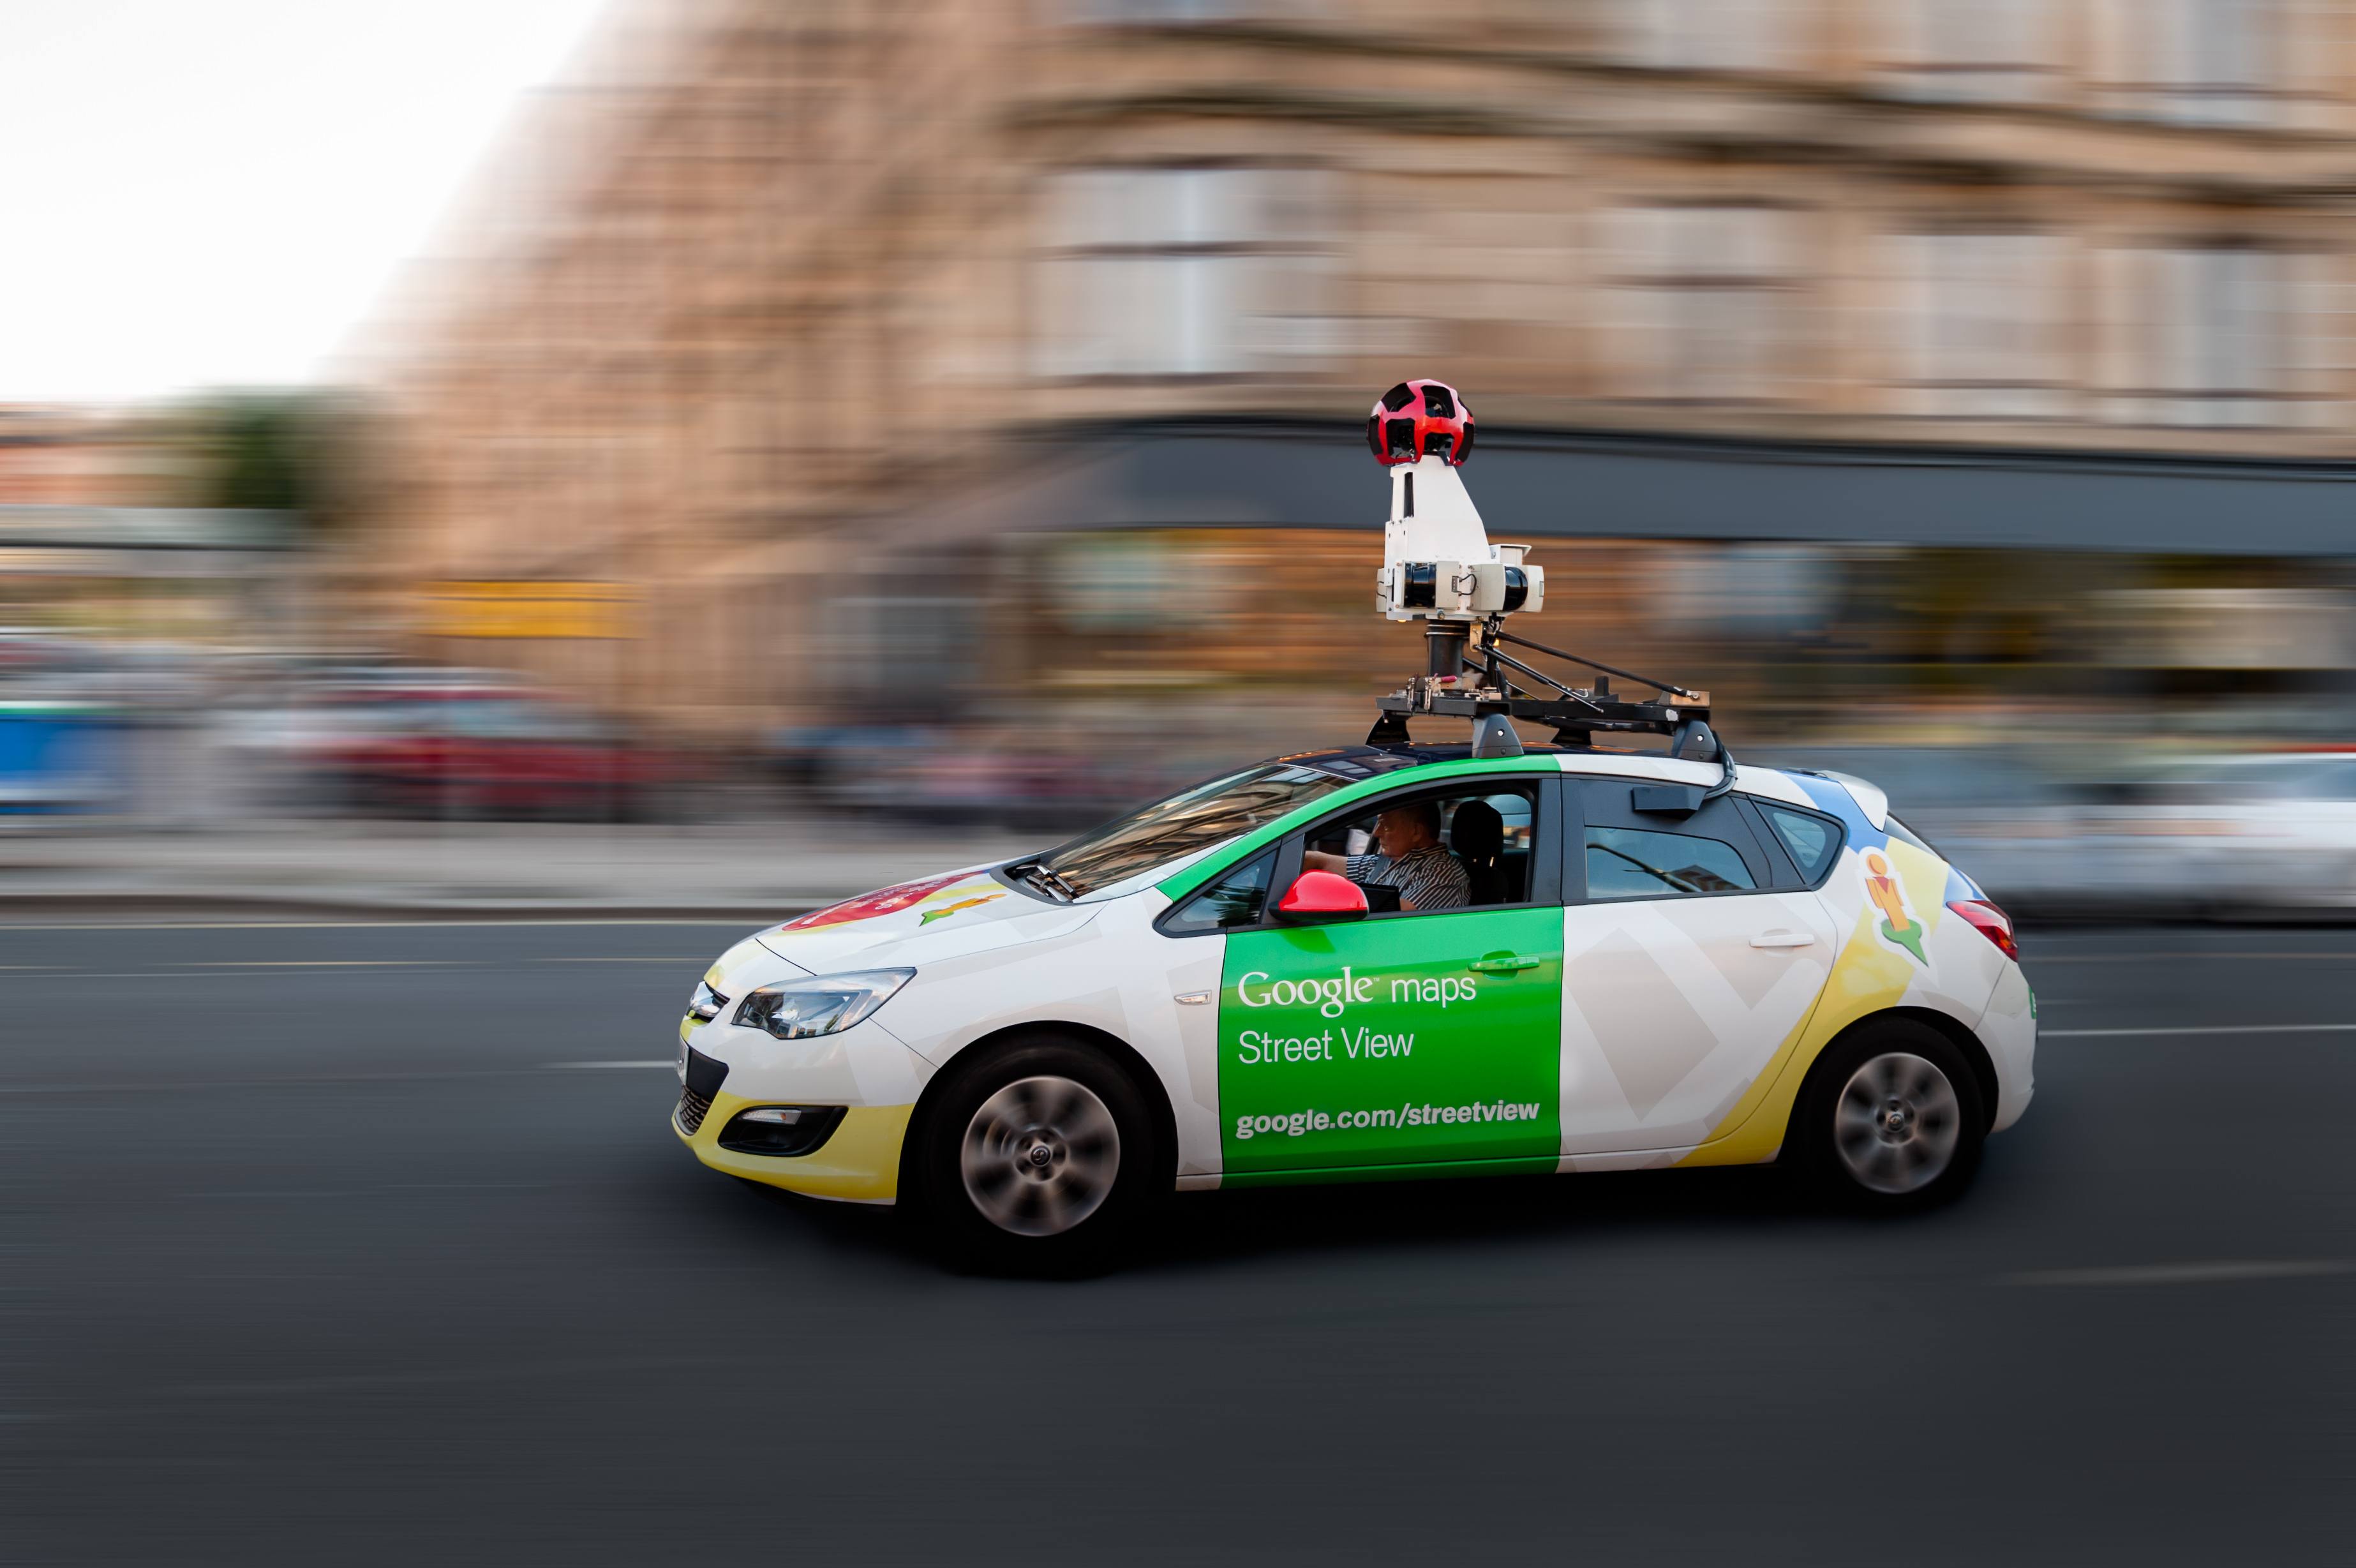 A Google Street View surveys the city street on July 17 2014 in Glasgow.